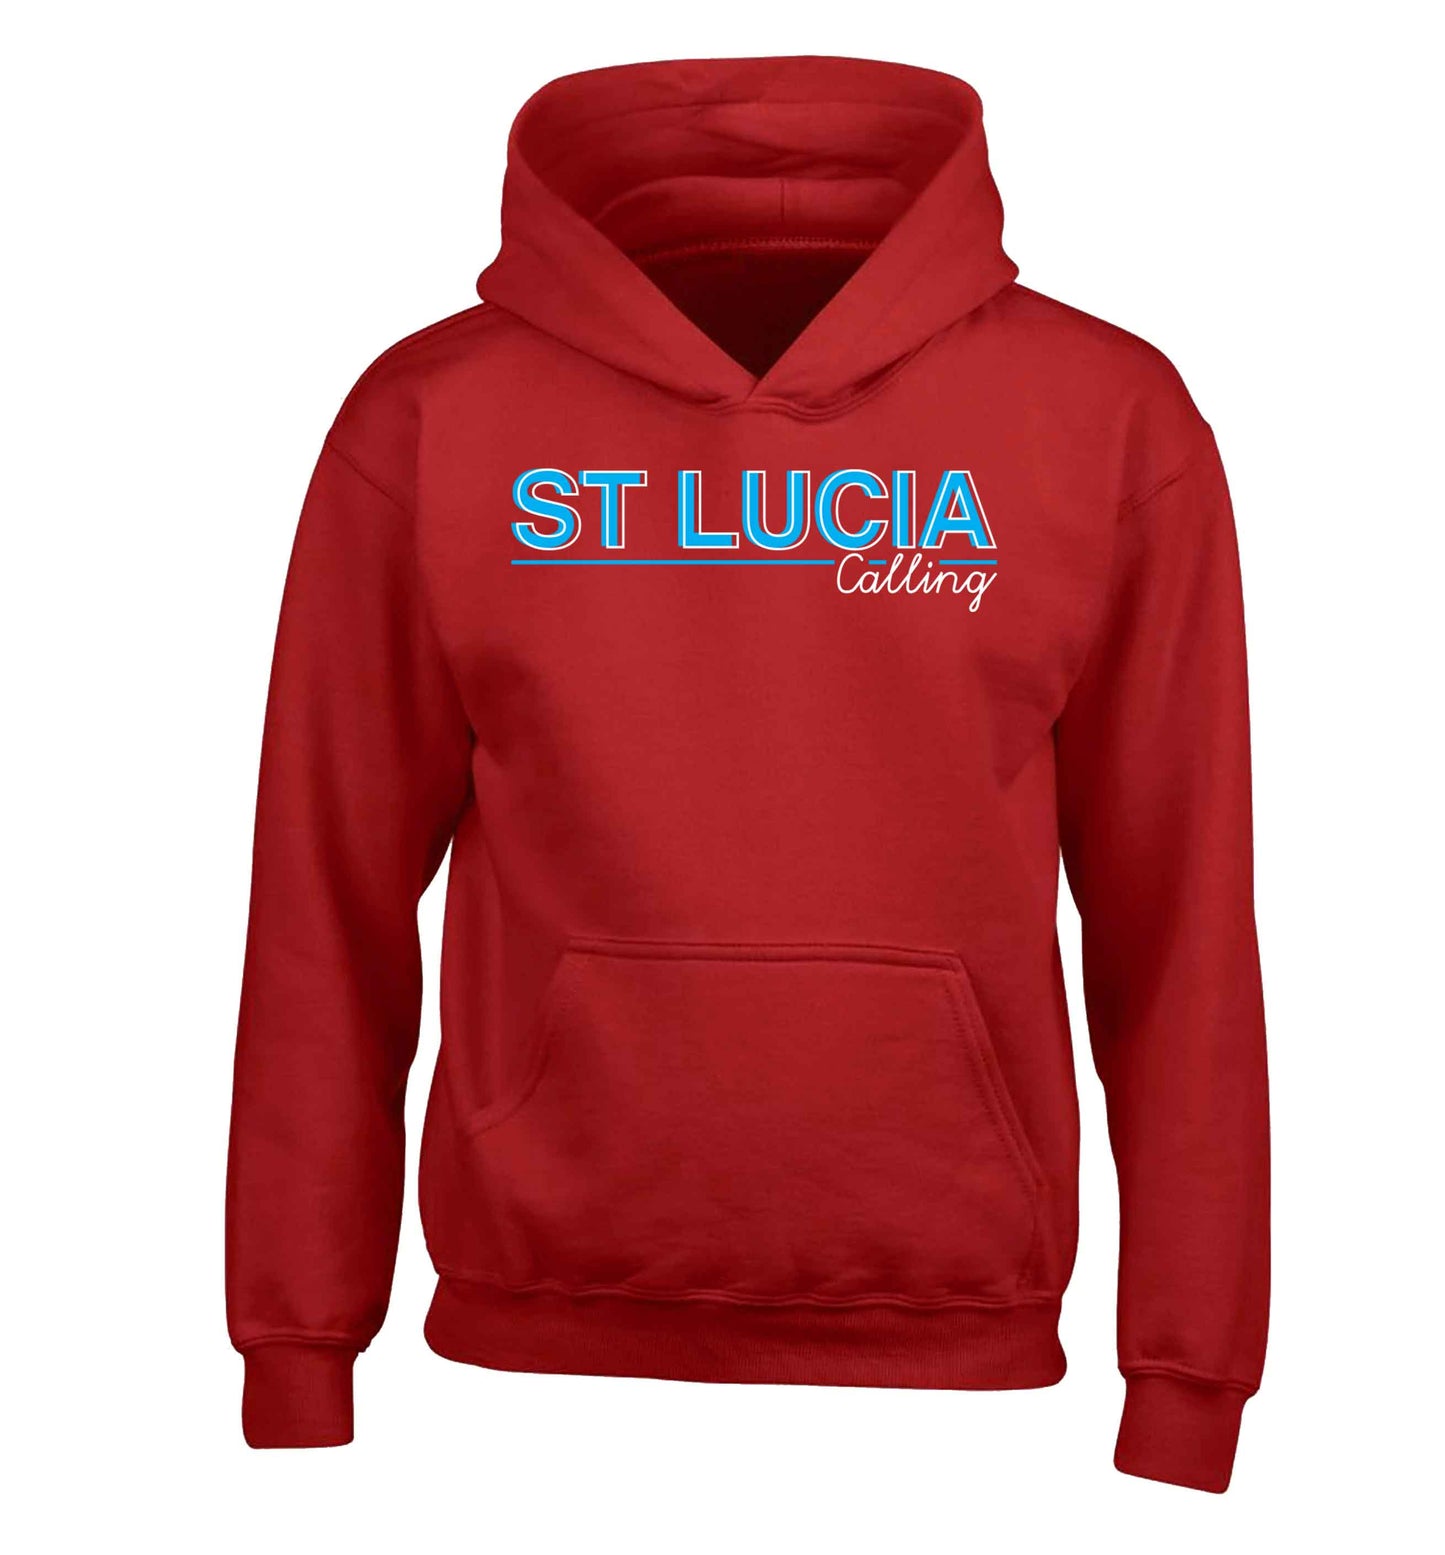 St Lucia calling children's red hoodie 12-13 Years